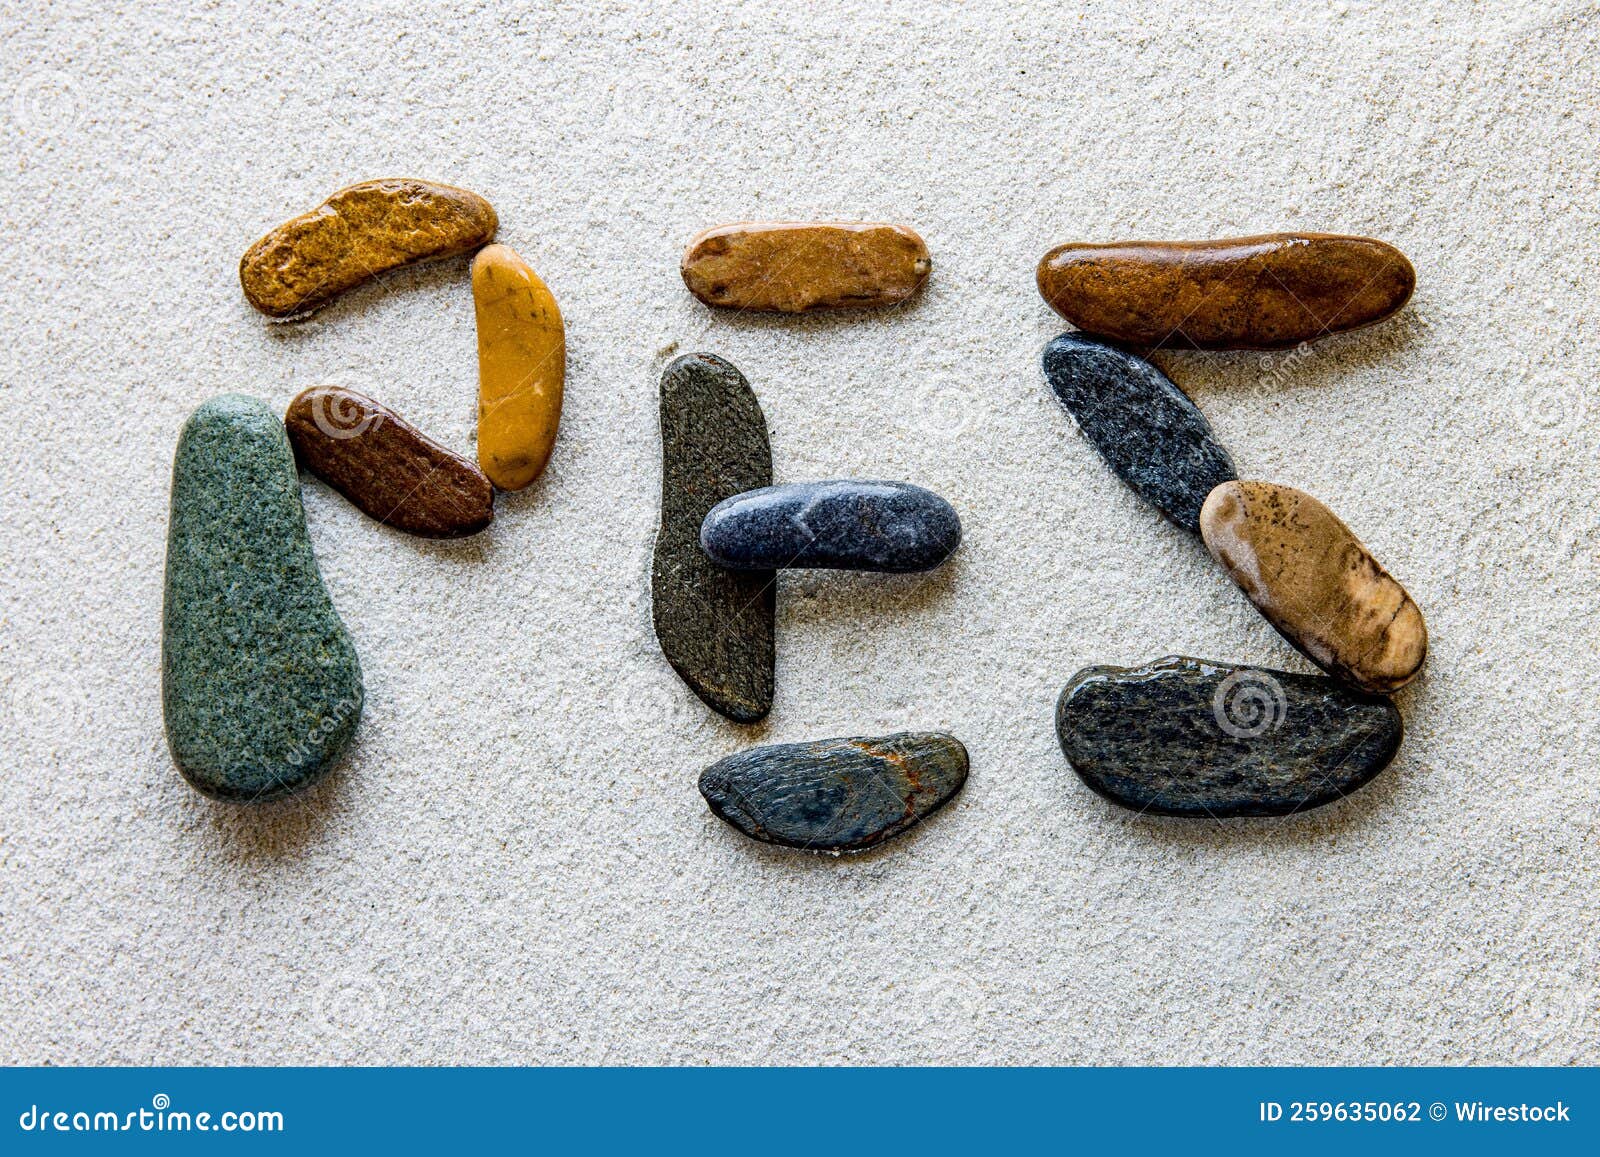 word pez is written using colored stones on a white grainy surface
translation: fish